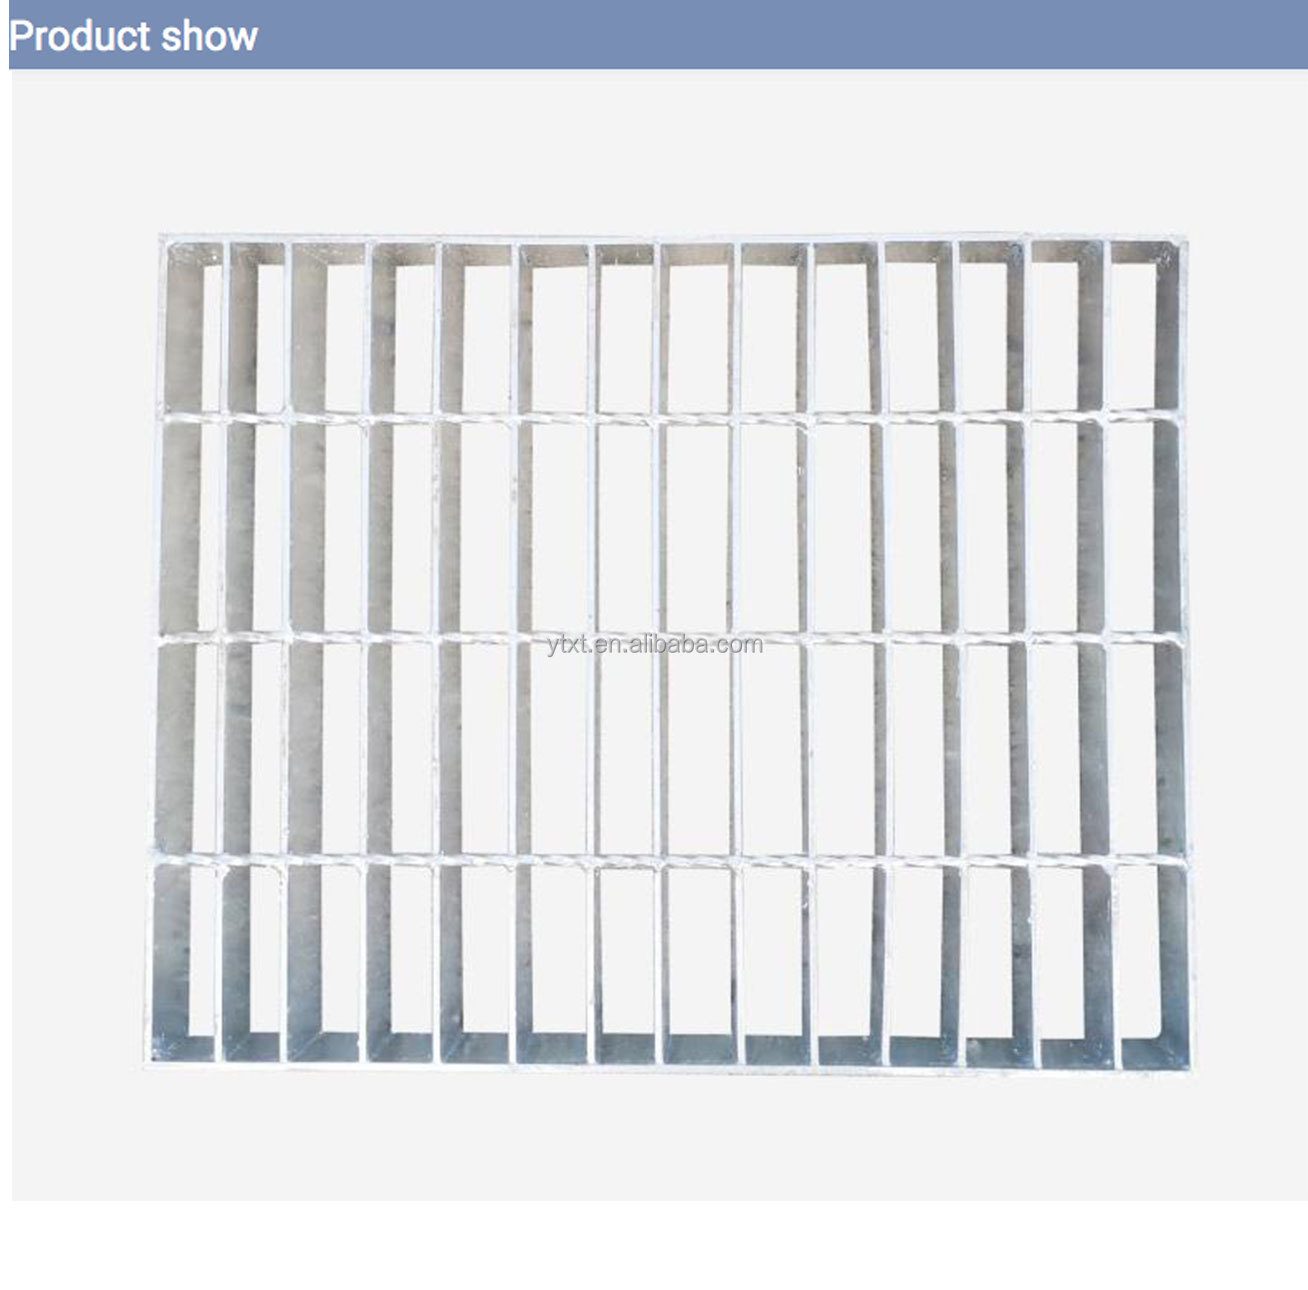 structural building materials Building Structural Stainless Materials Square Weight  Galvanized  Steel Grating